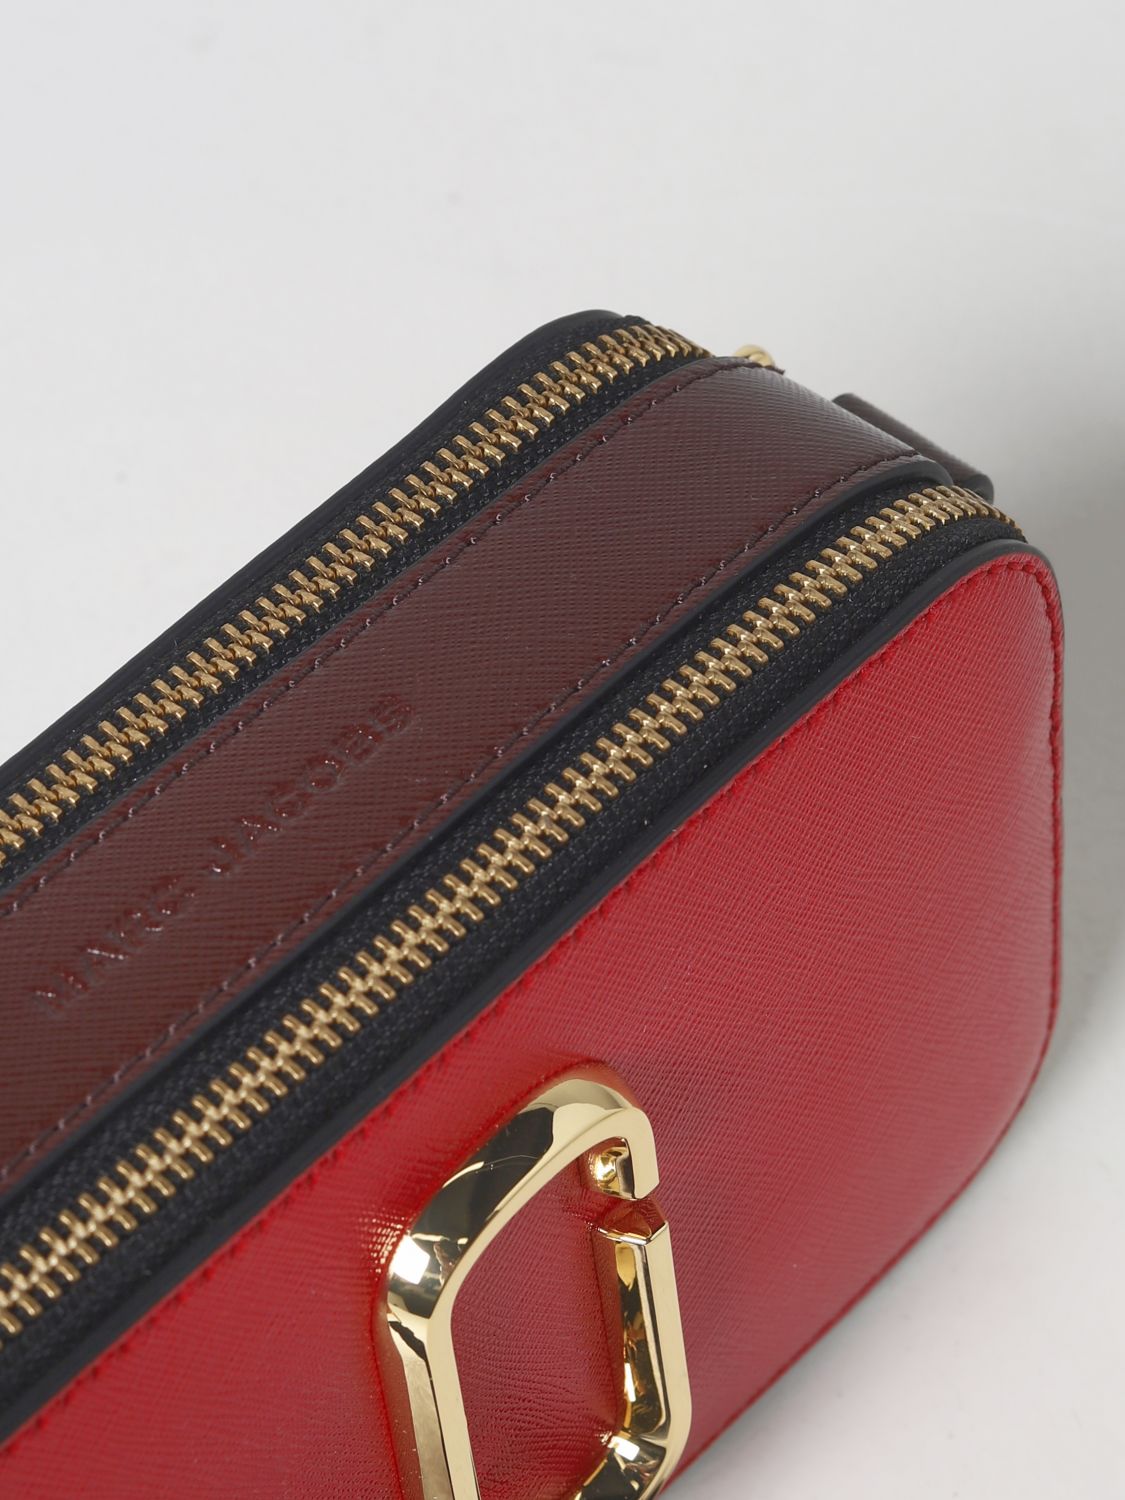 Marc Jacobs The Snapshot Small Camera Bag Black/Red